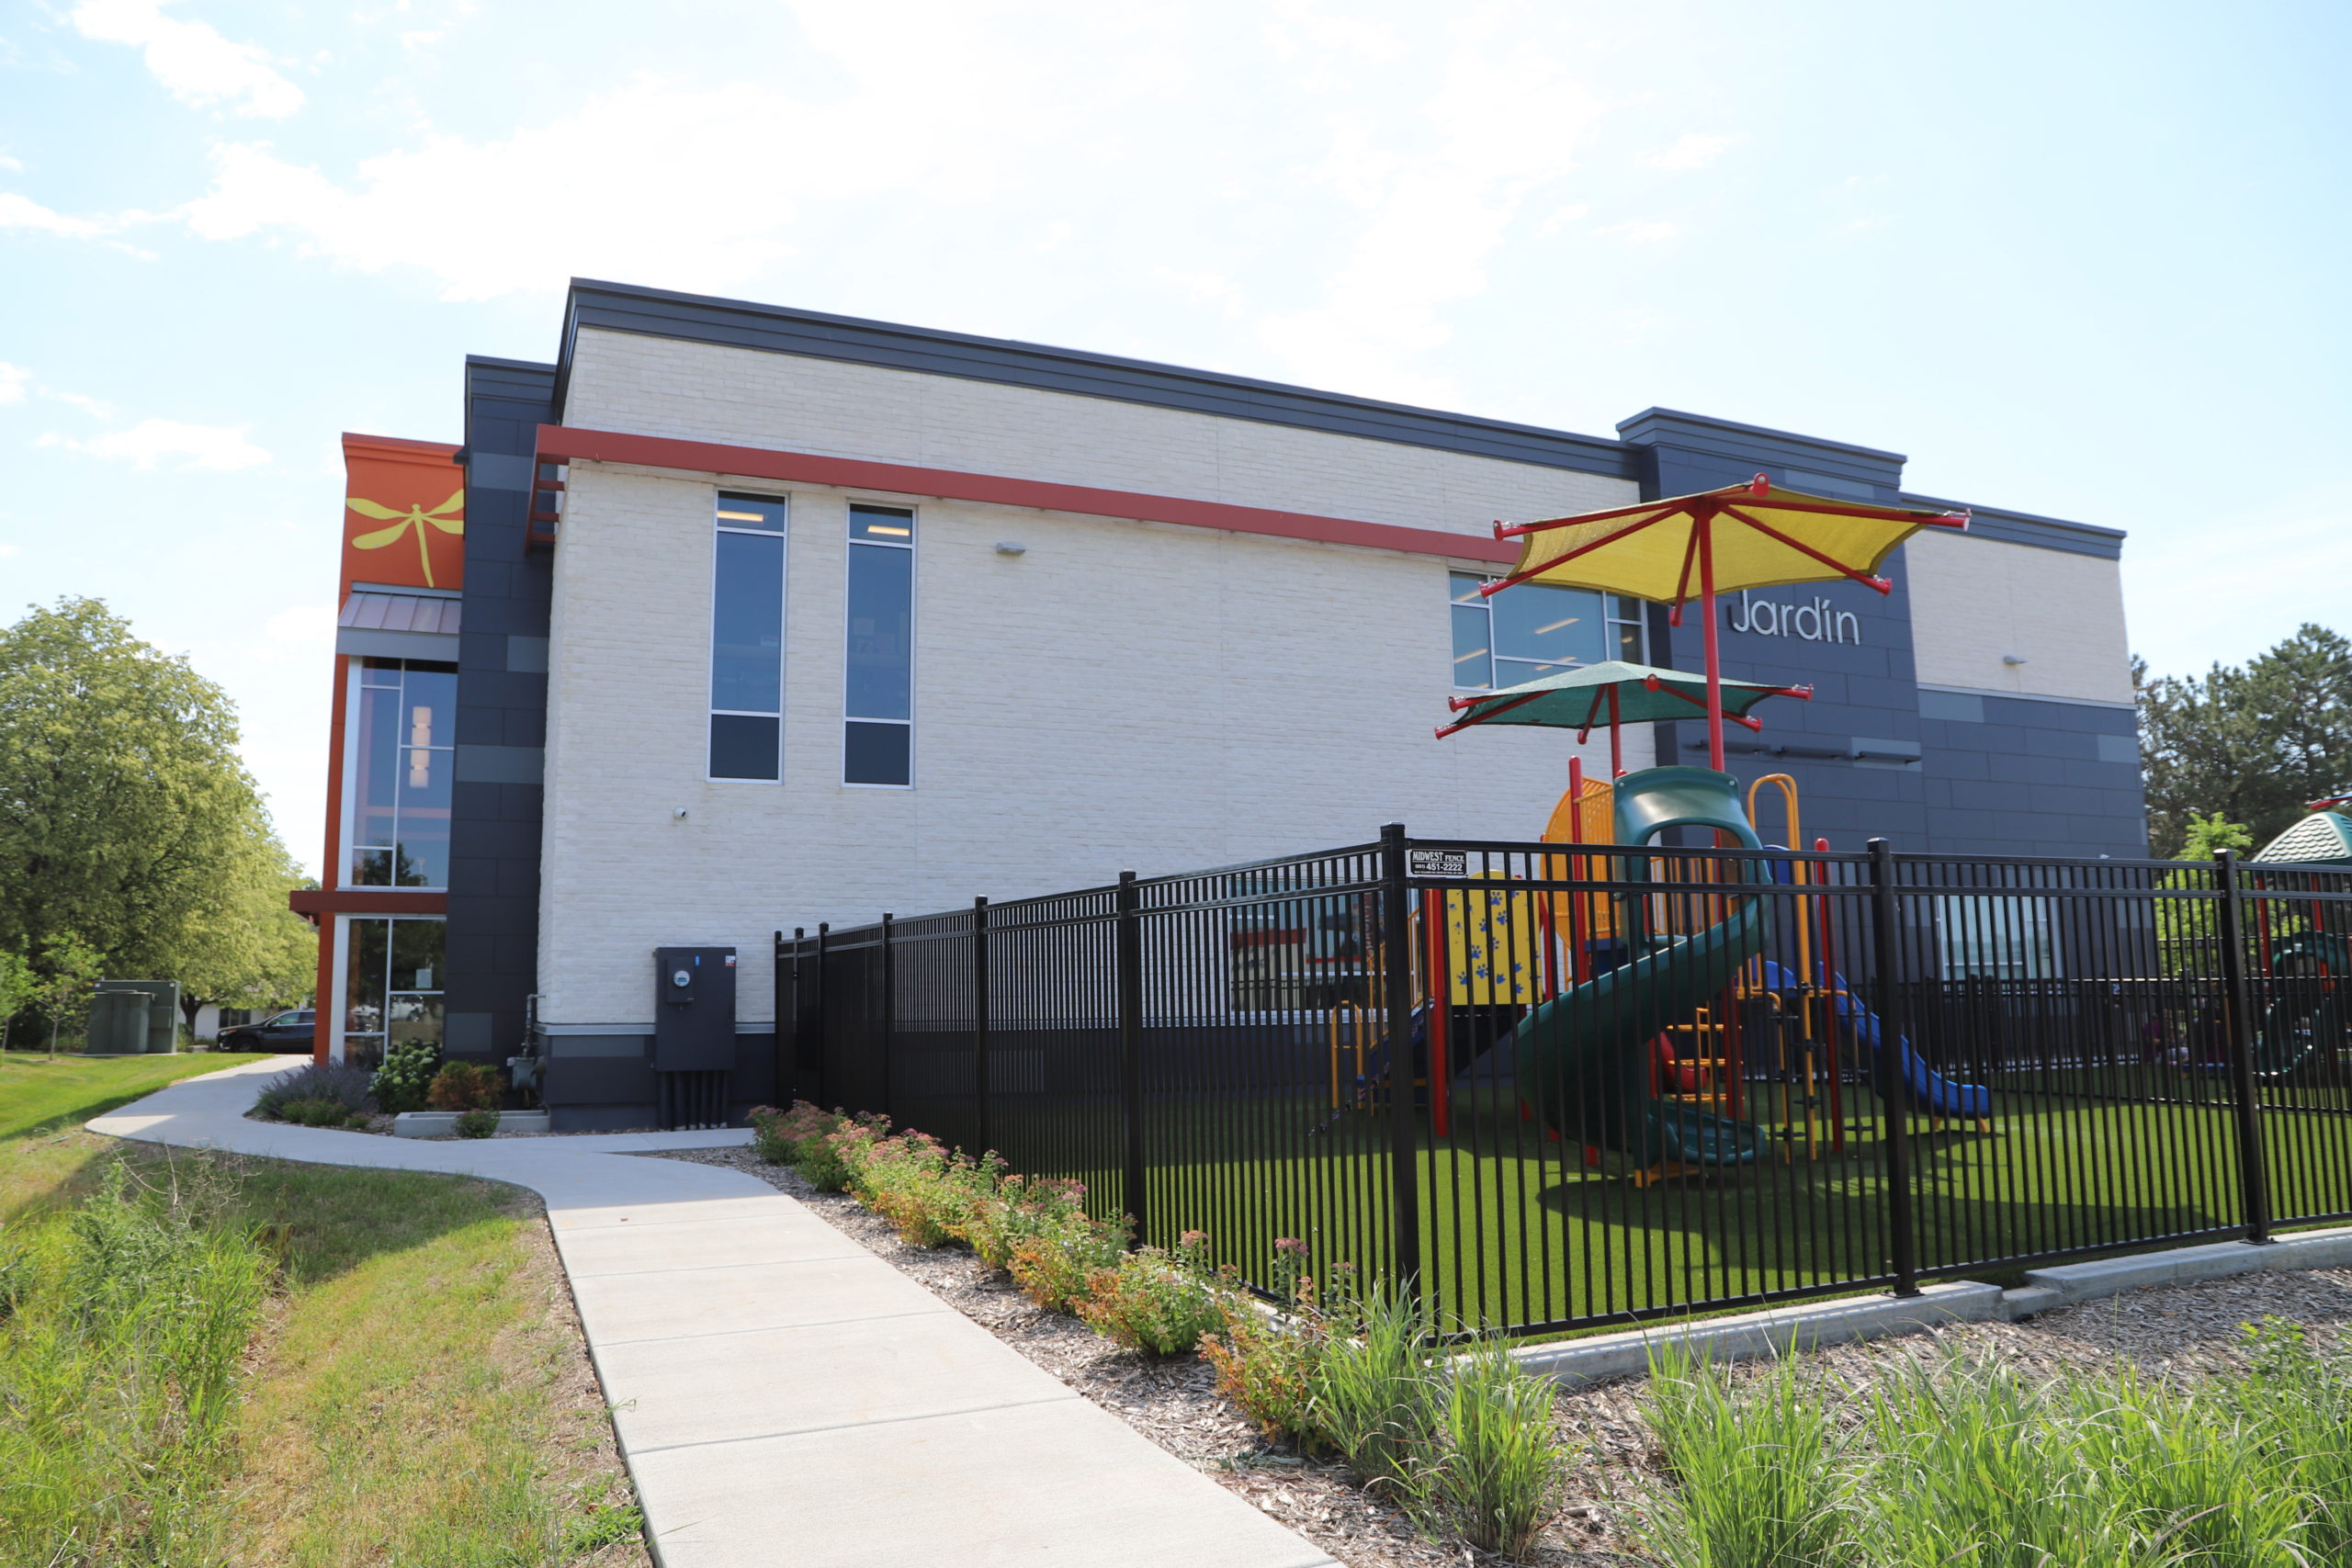 Large multi colored commercial building with a fenced area in front containing playground equipment.